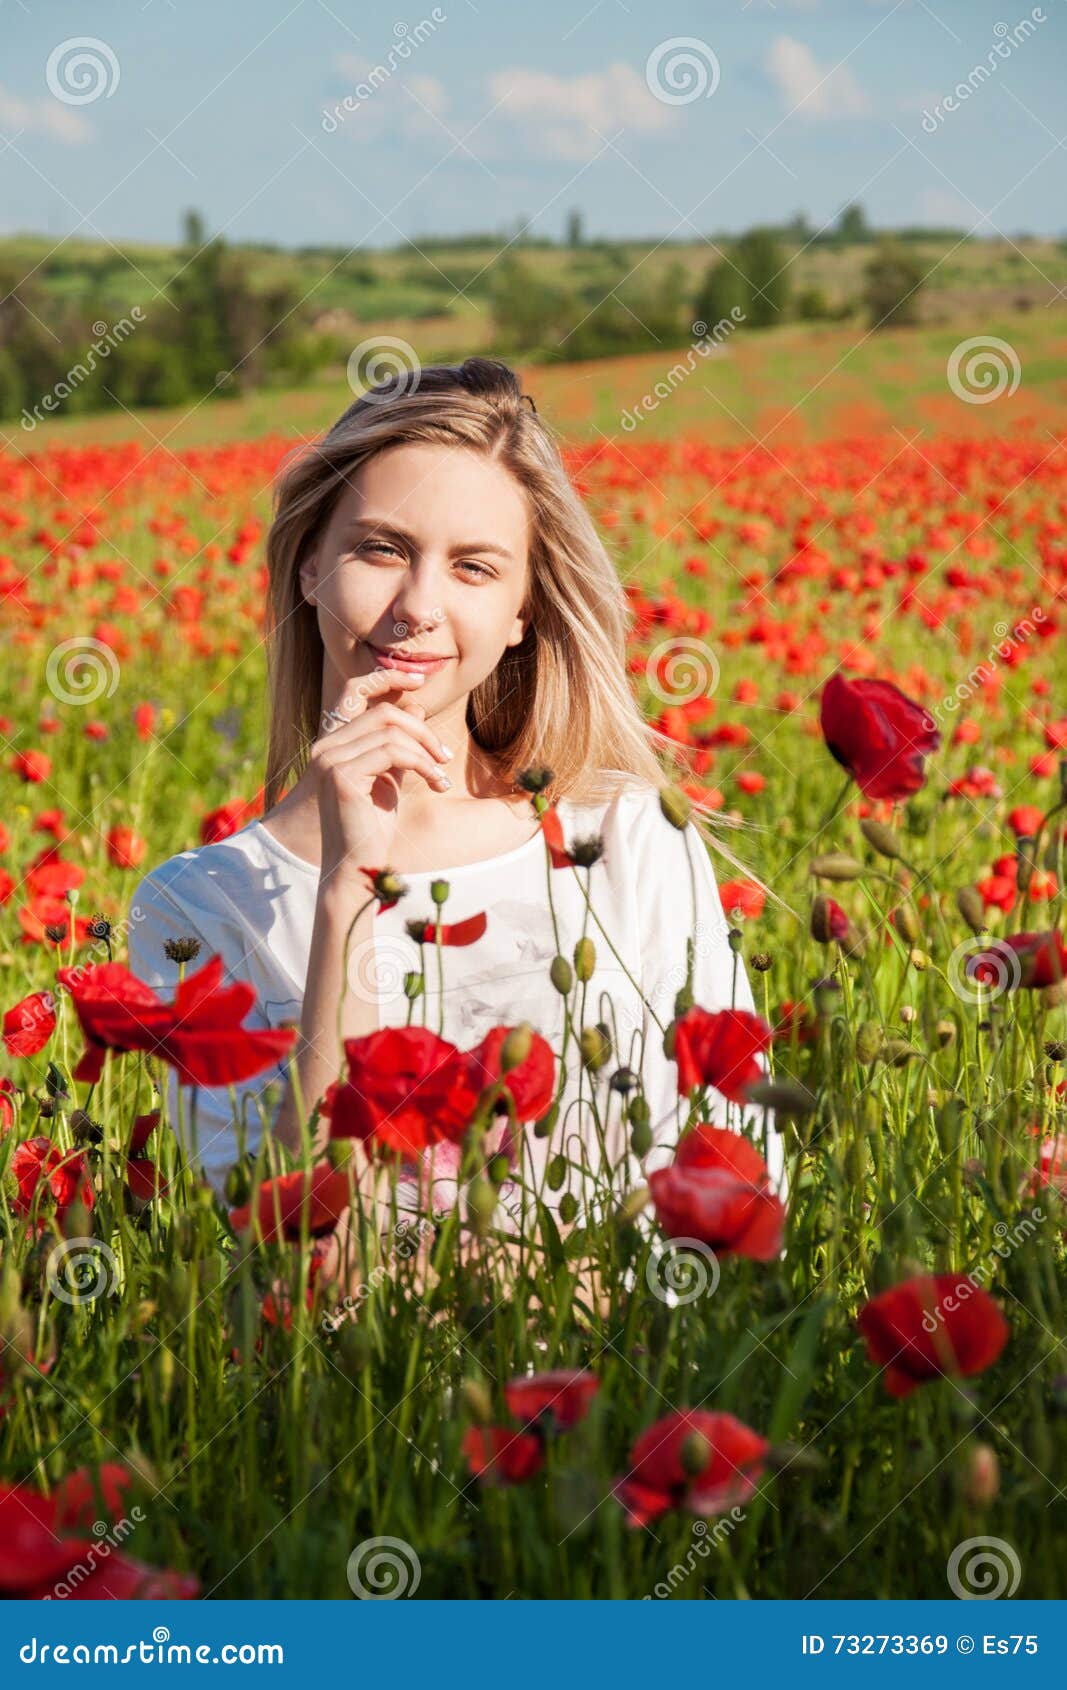 Young Girl In The Poppy Field Stock Image Image Of Attractive Meadow 73273369 